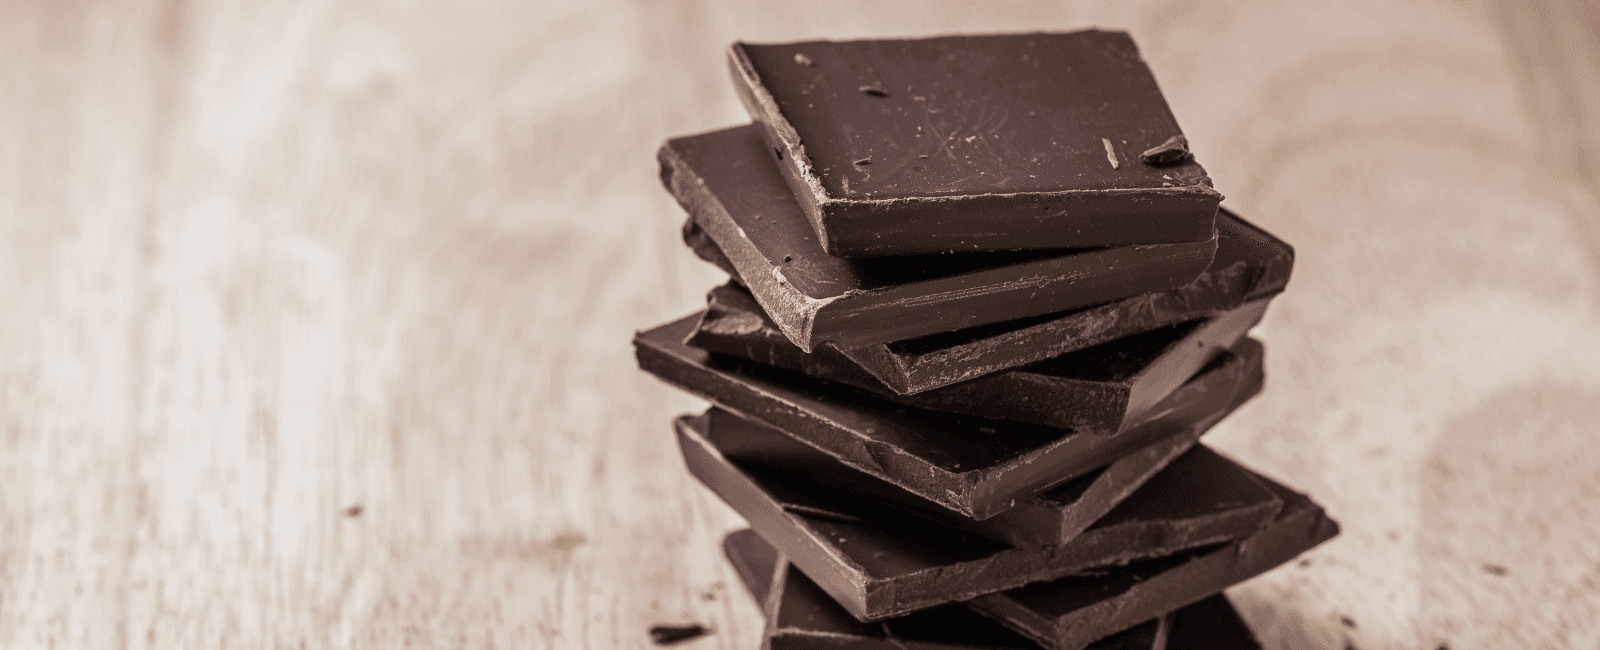 FDA and CDC Warn Against Mushroom 'Microdosing' Chocolate Bar and Edible Brand Linked to Severe Health Reactions